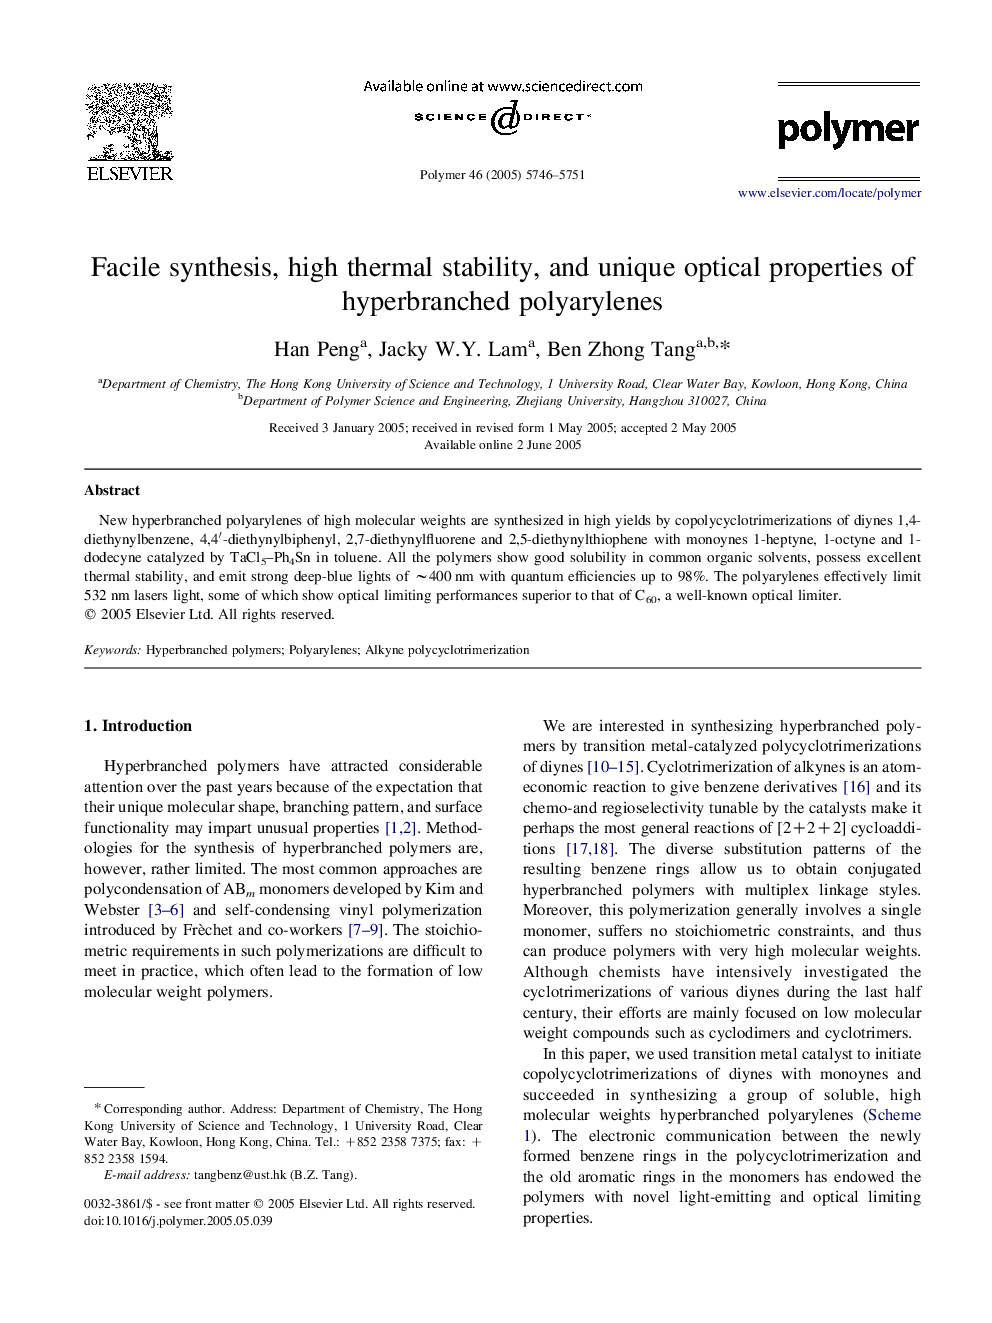 Facile synthesis, high thermal stability, and unique optical properties of hyperbranched polyarylenes